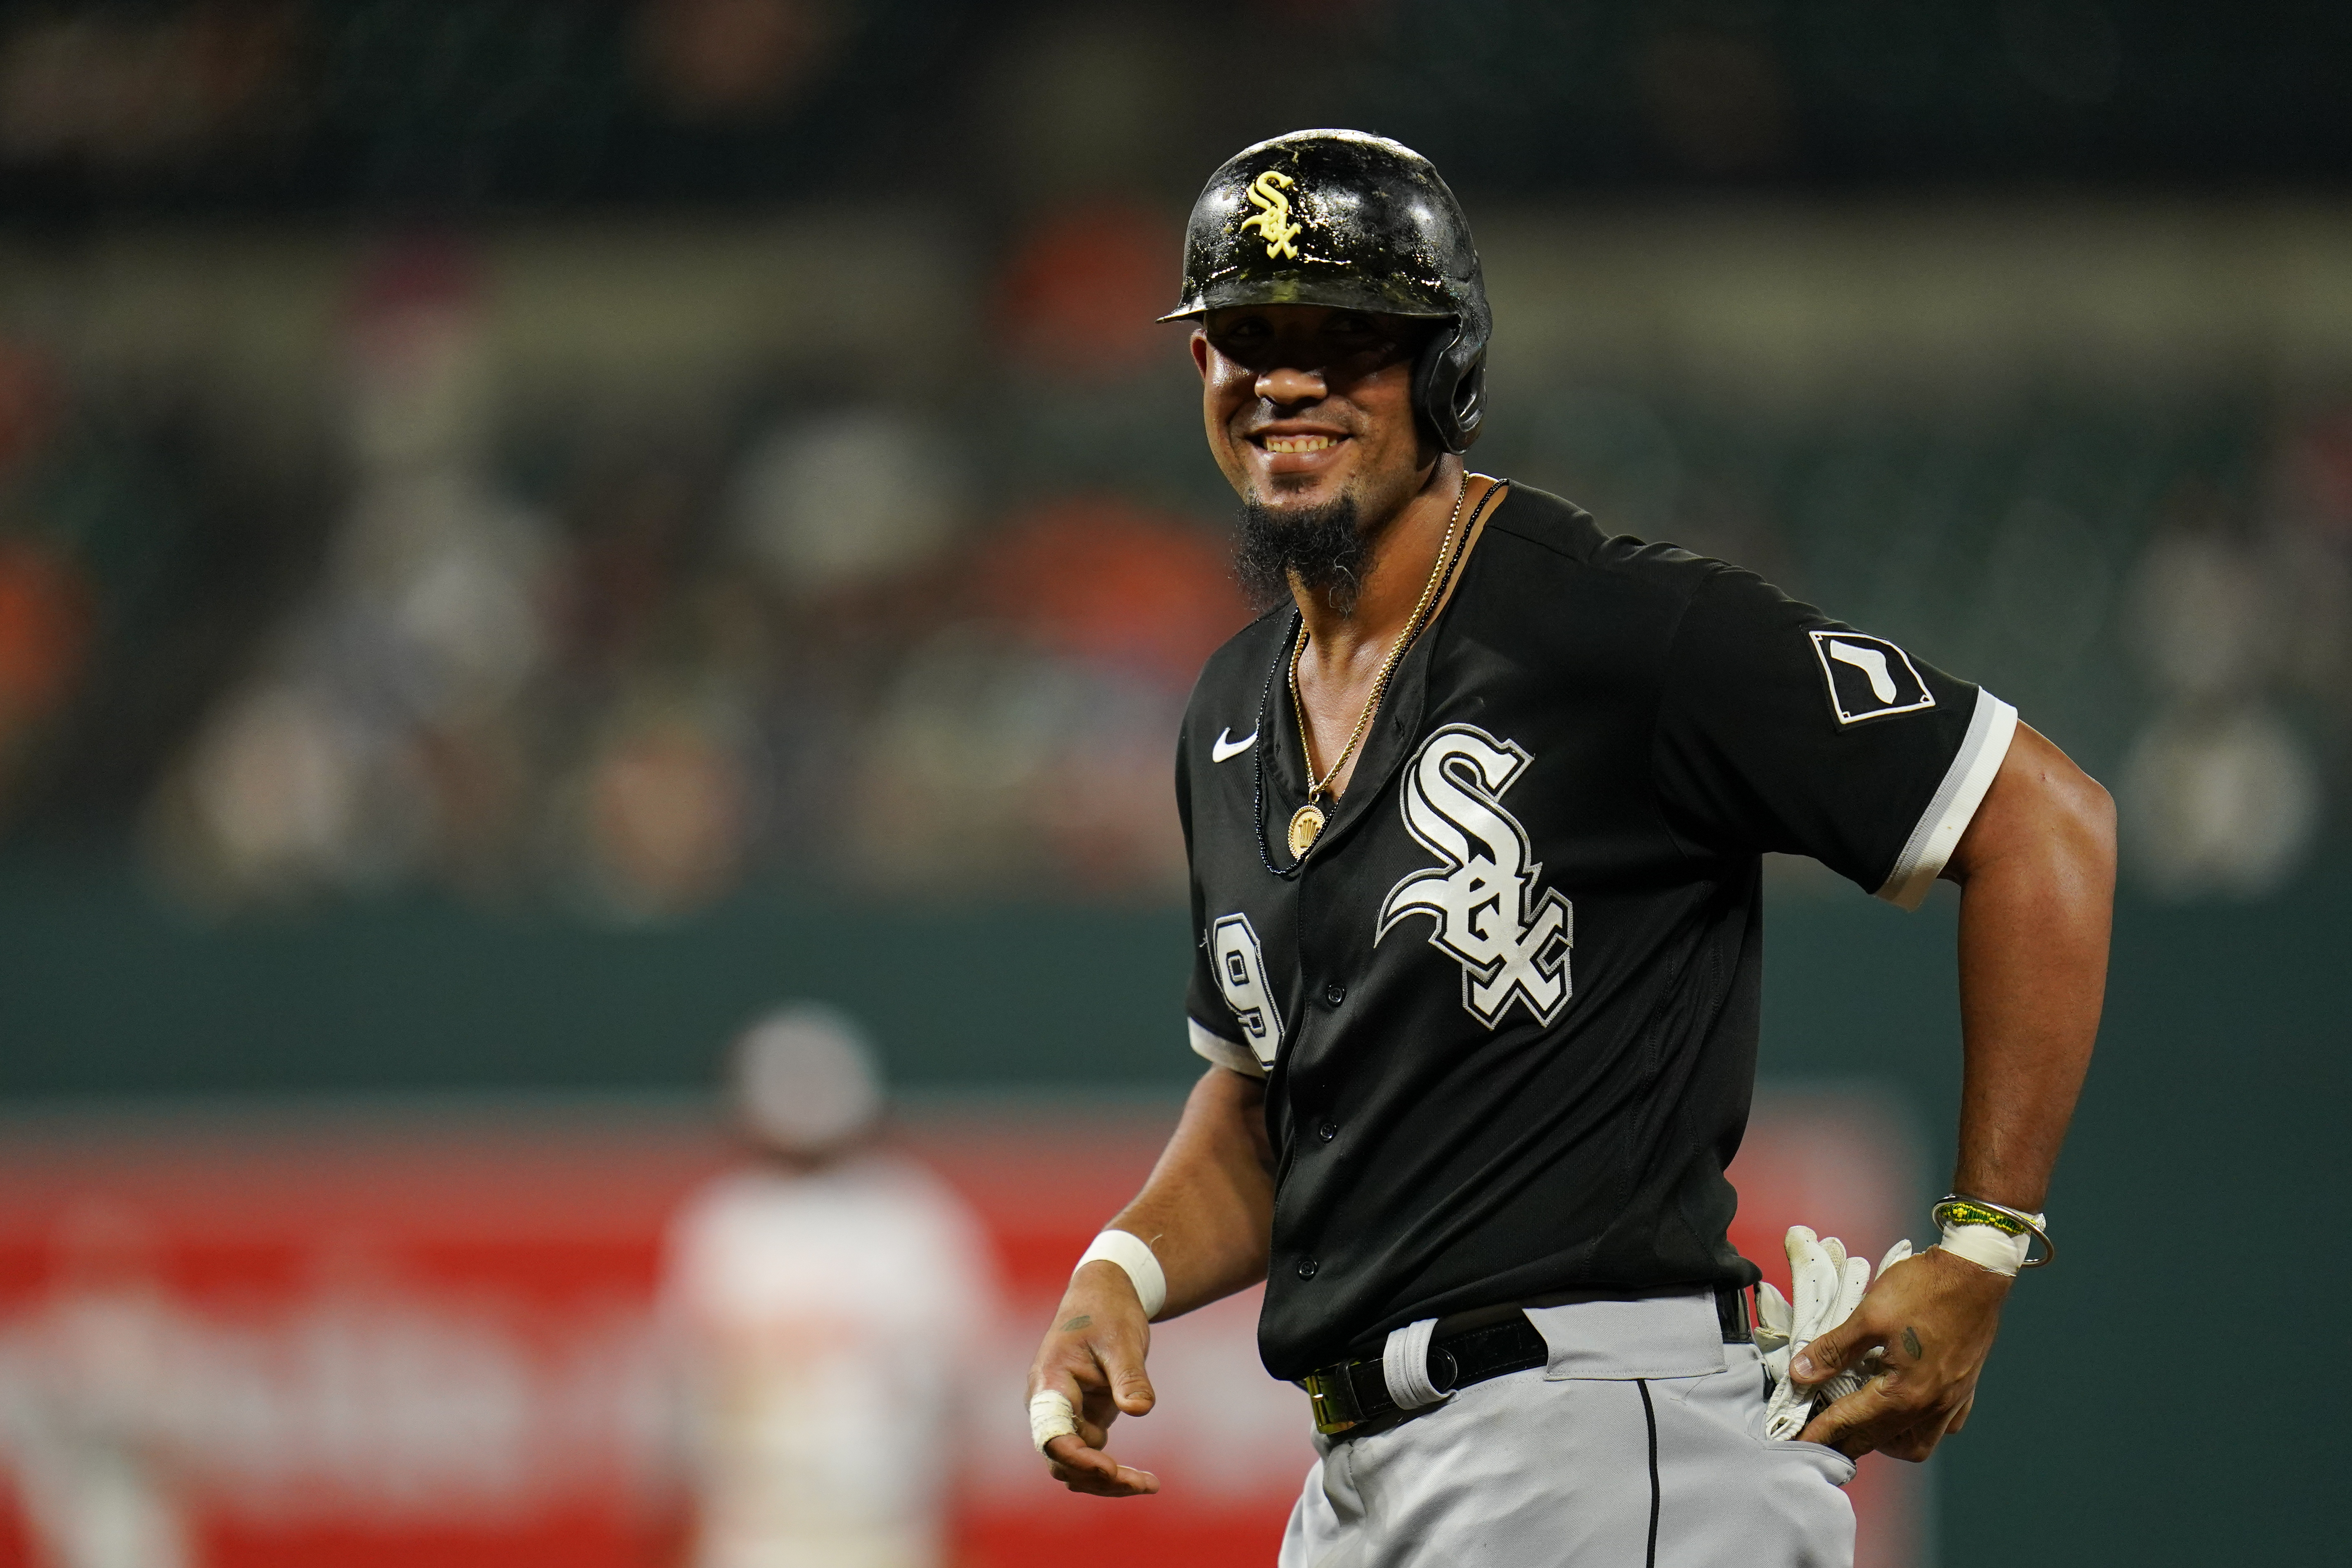 Rumored Red Sox target José Abreu signs 3-year, $60M deal with